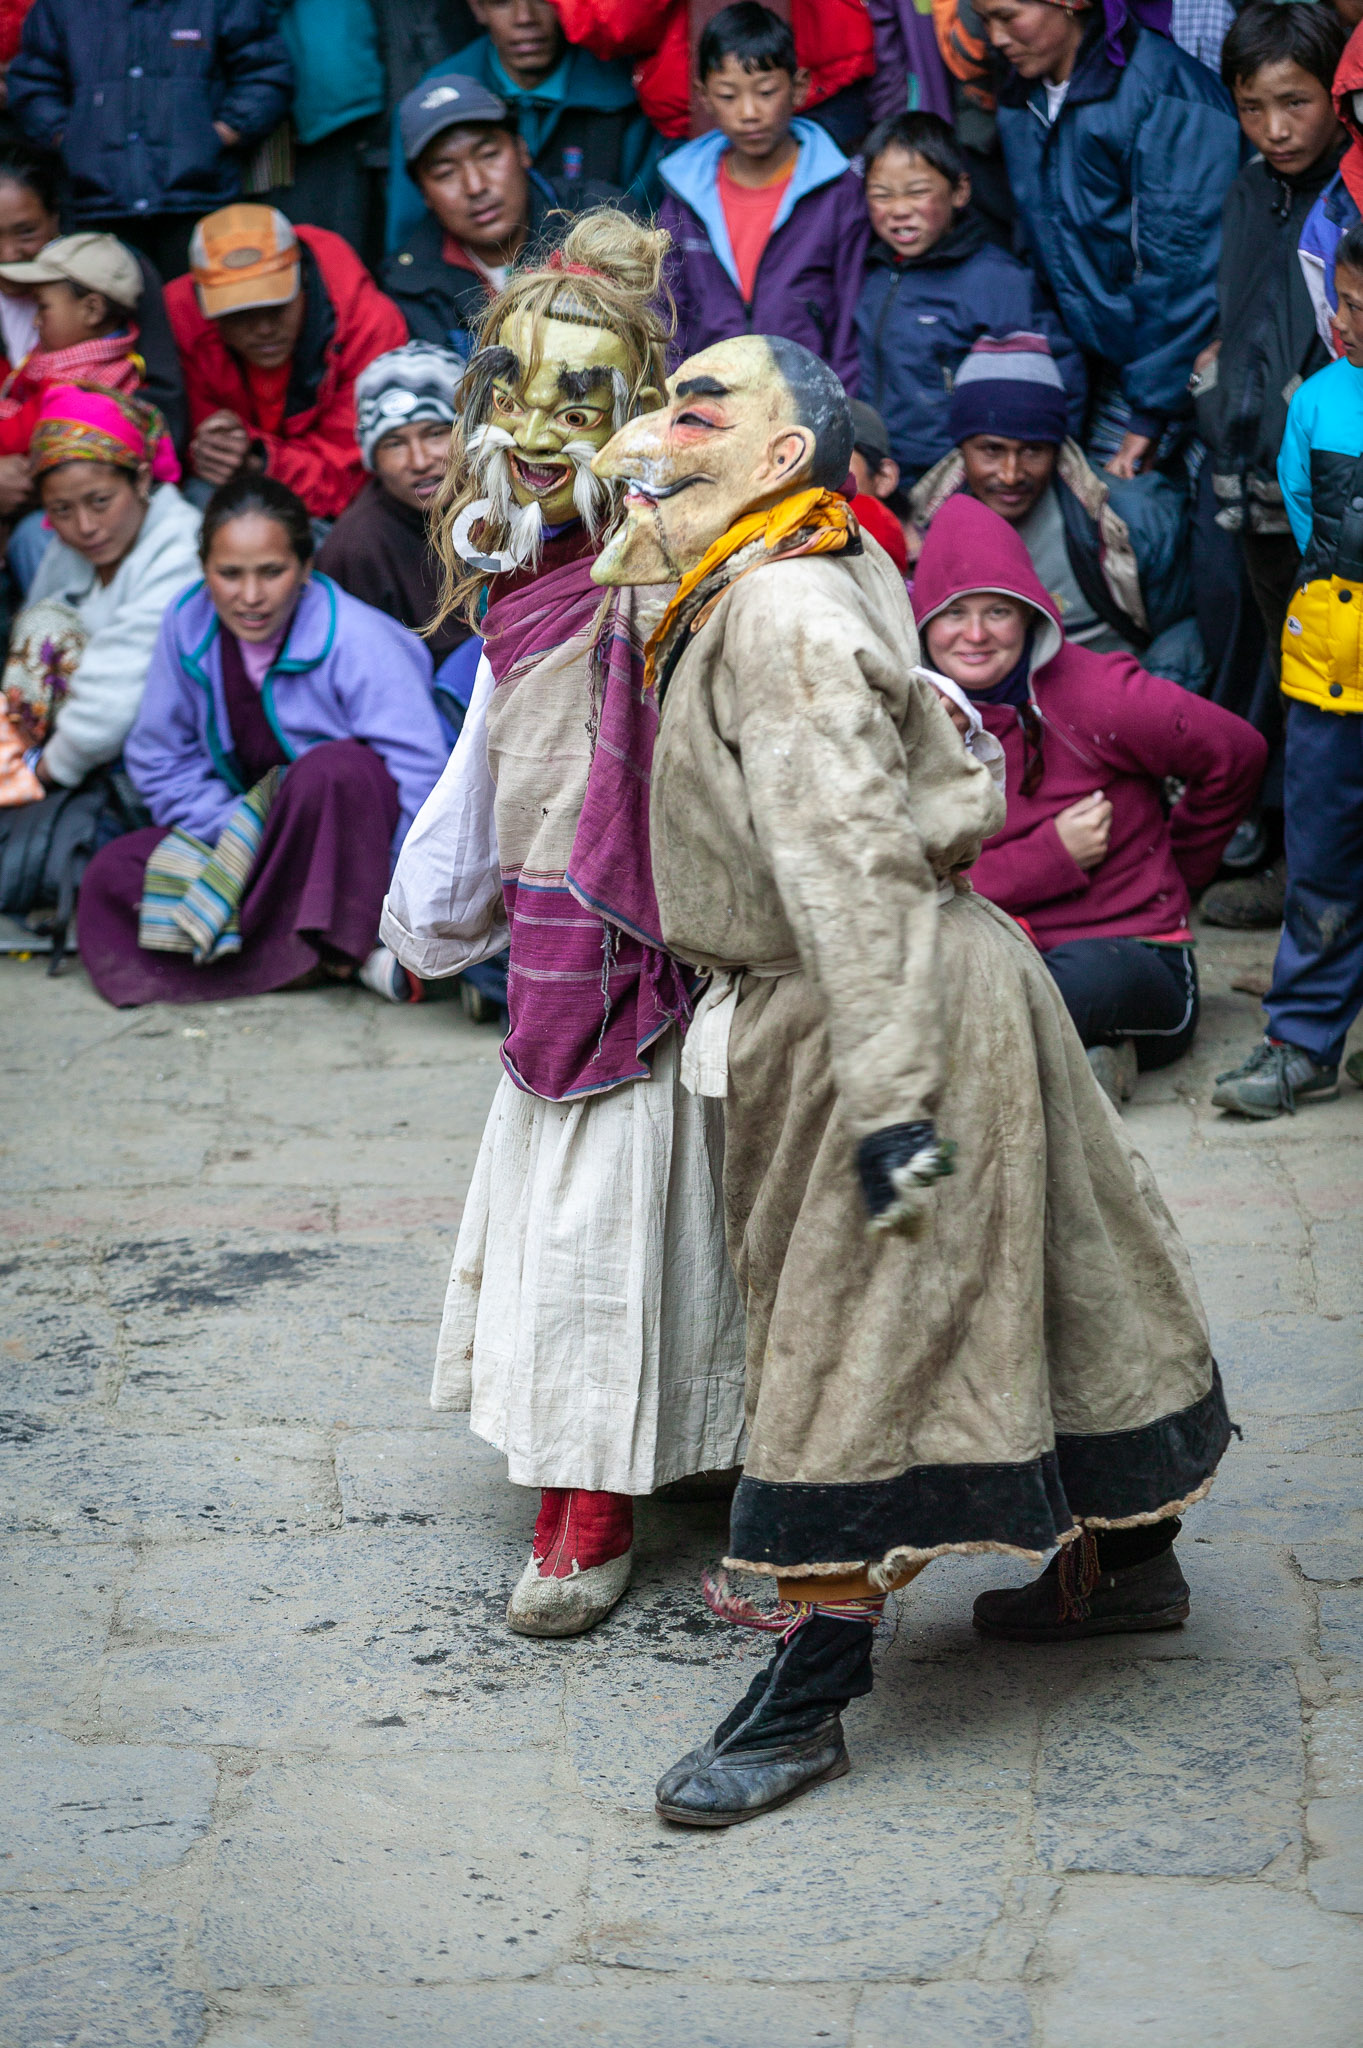 Dance of the Masks